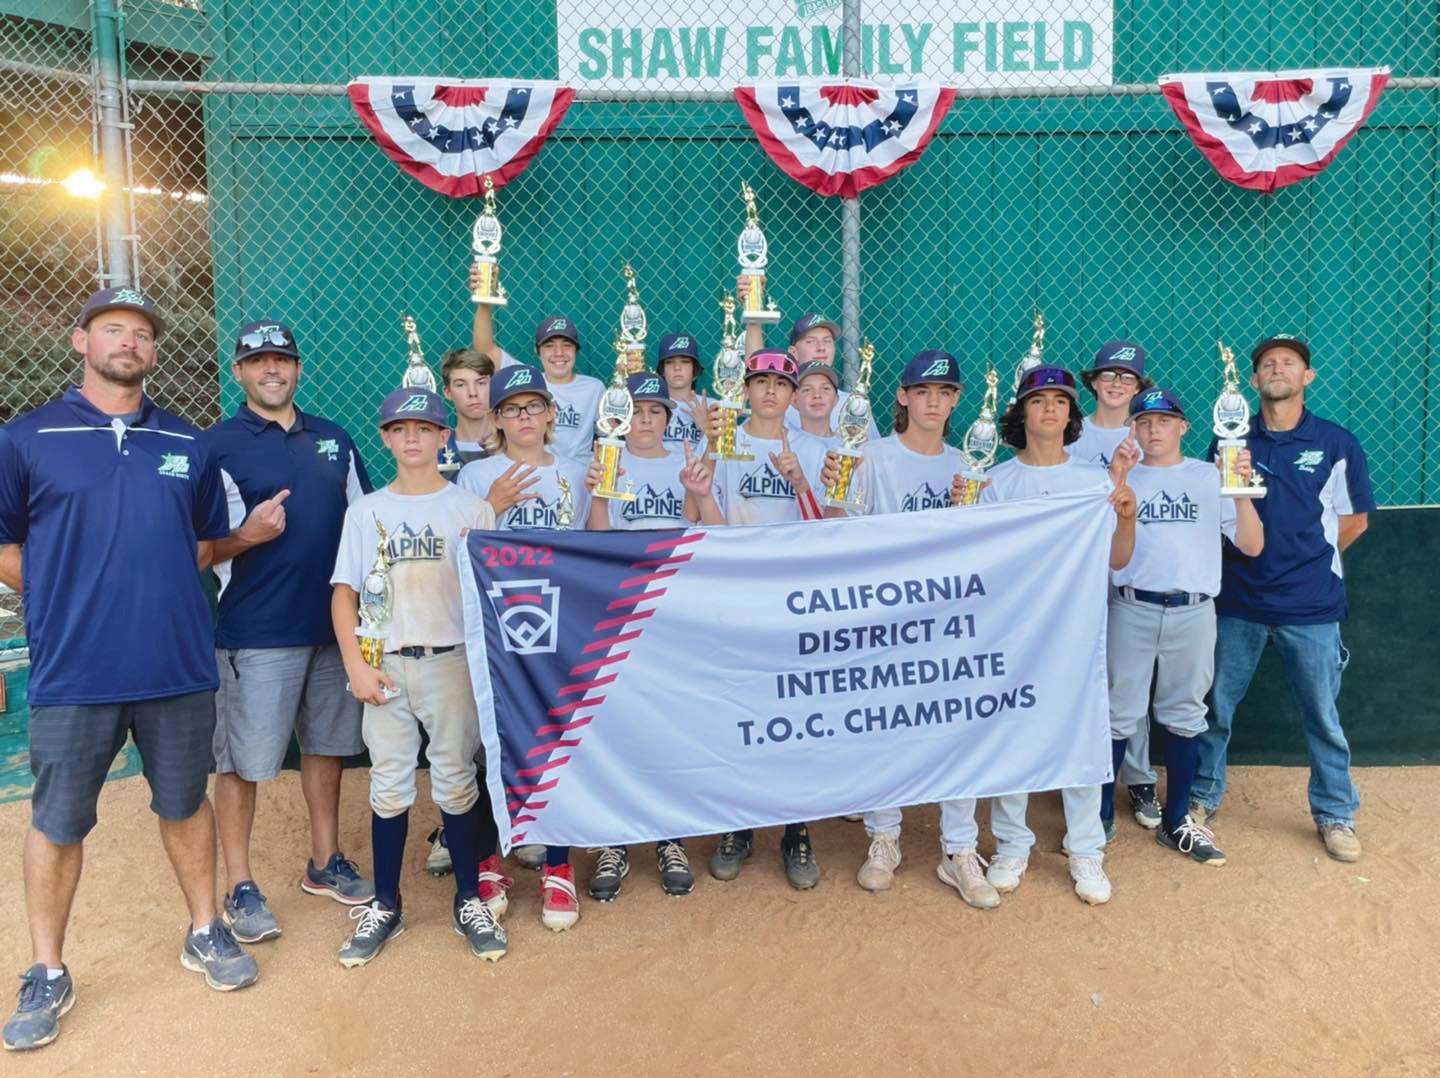 Road to the Little League World Series starts for East County teams